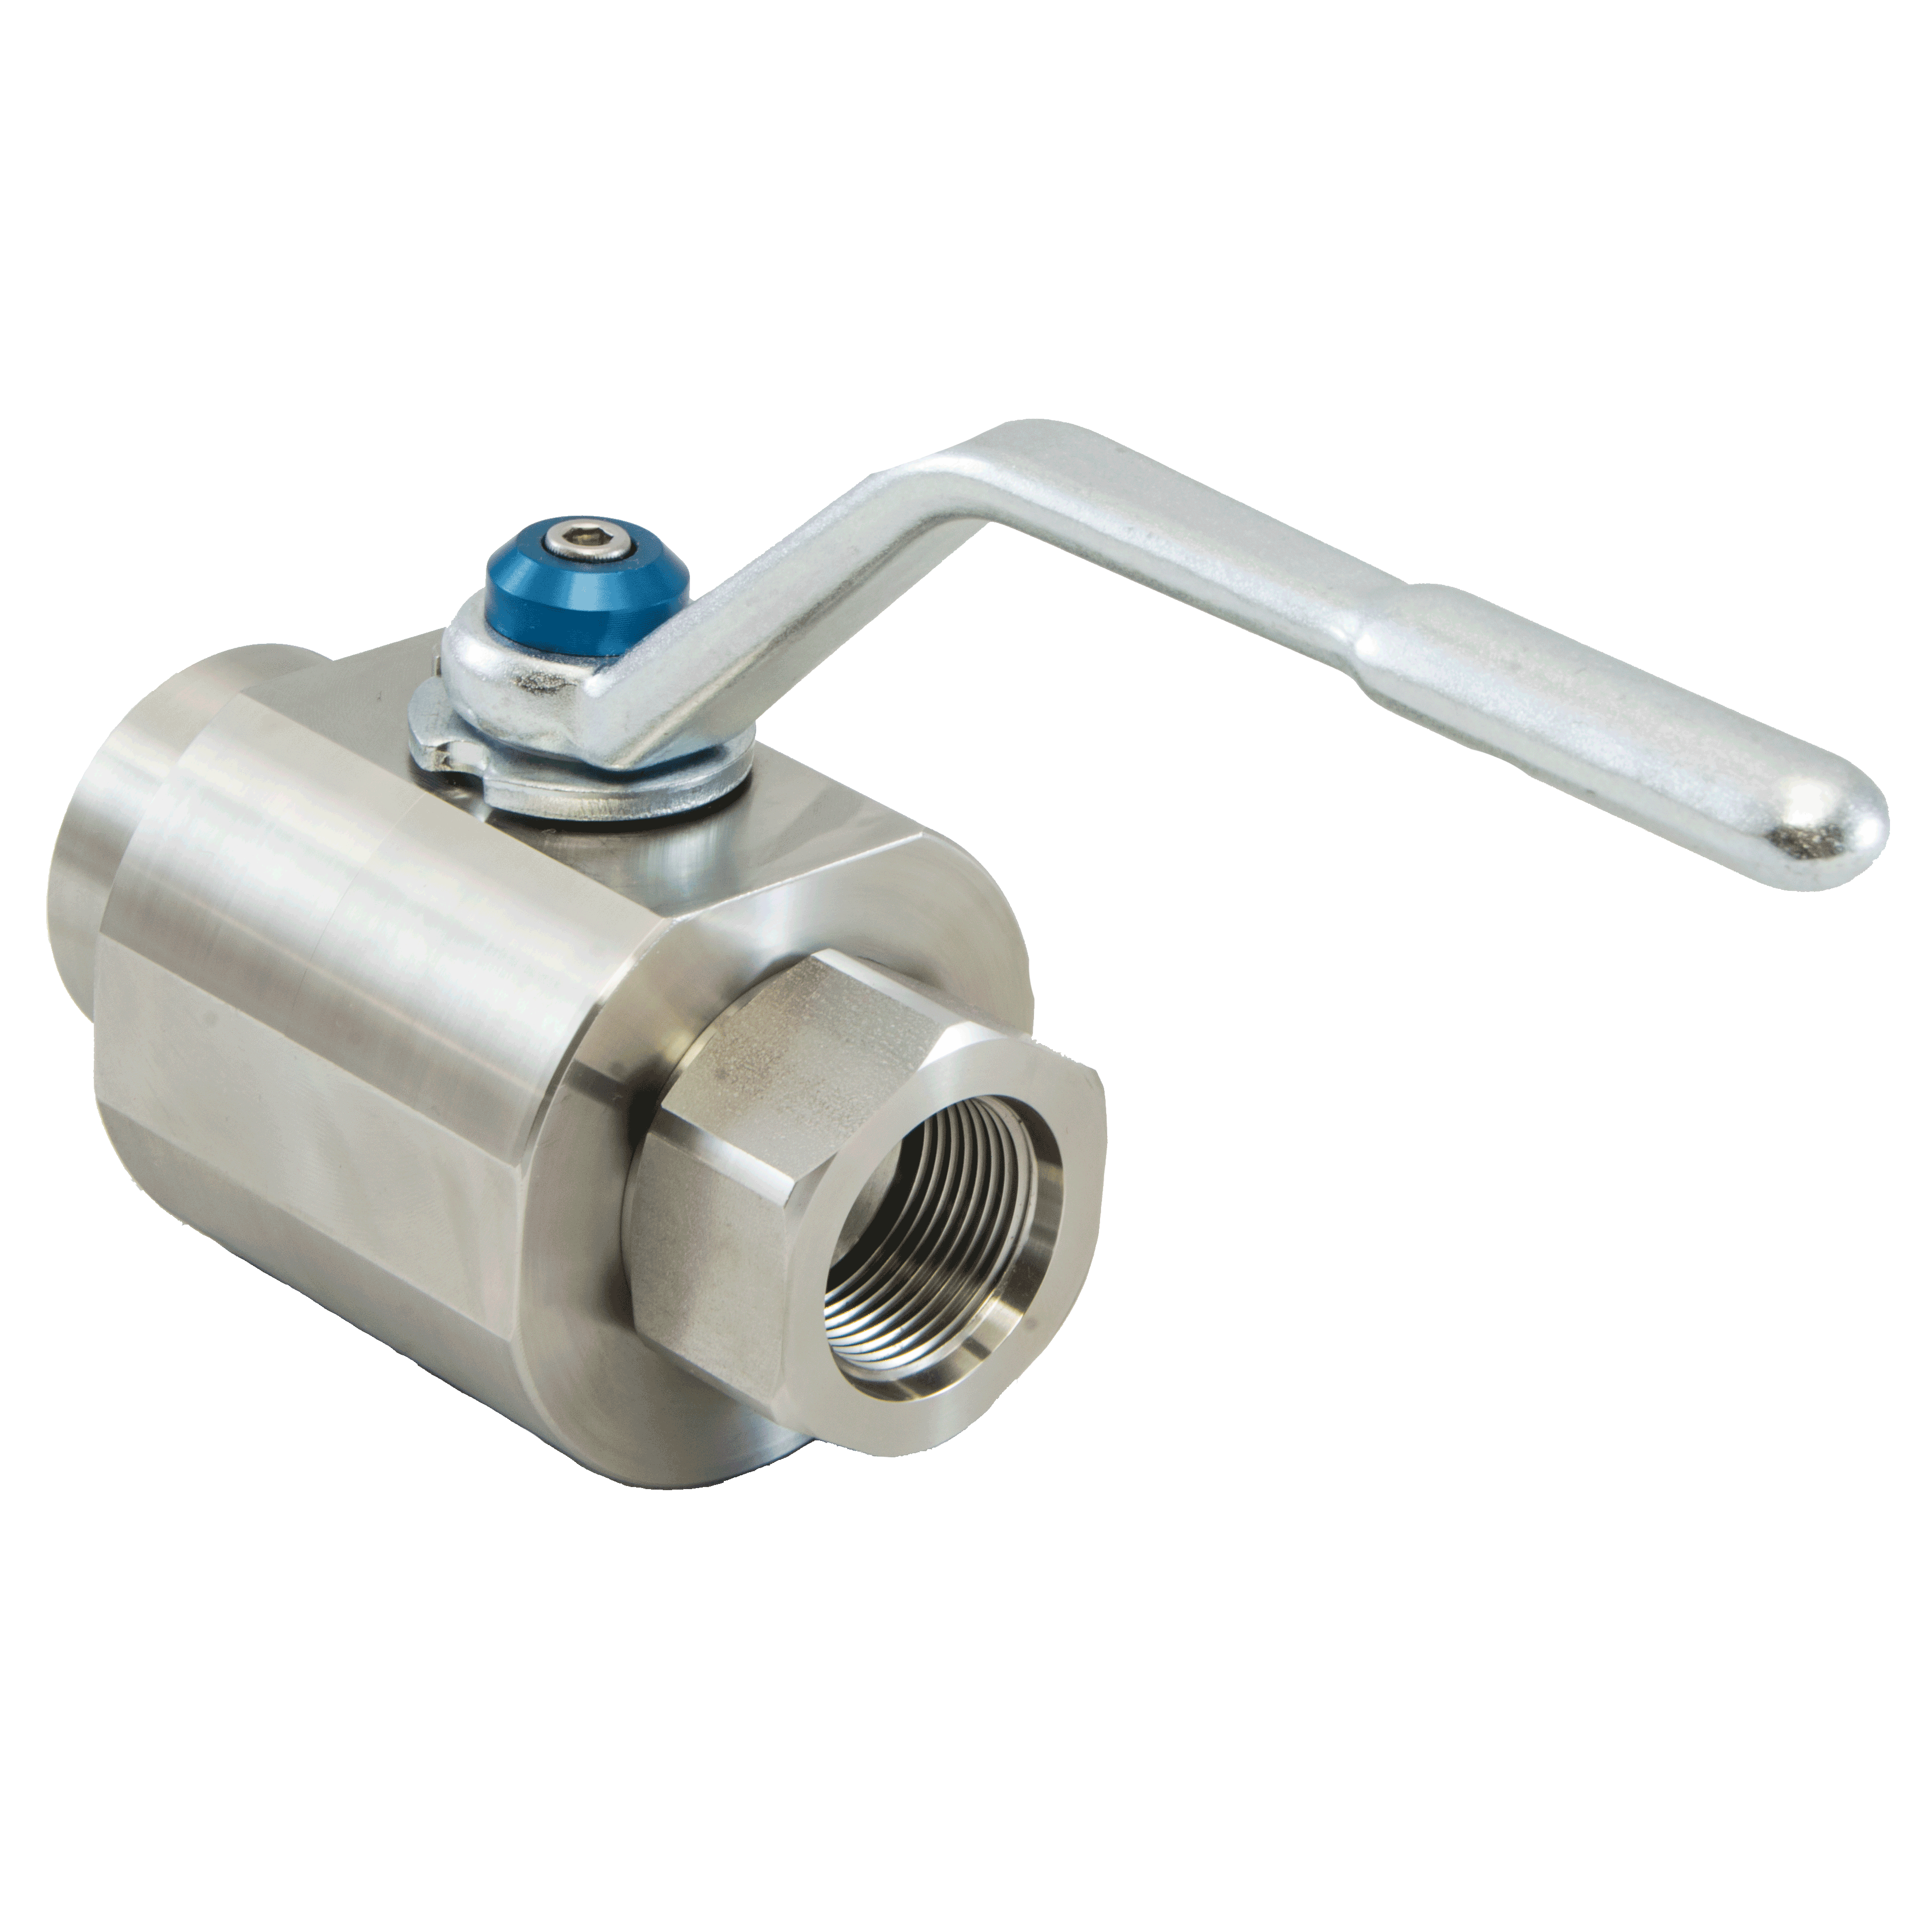 BVHS-1500S-2213 : DMIC Stainless Round Body Ball Valve, #24 SAE (1/2), 316 Stainless Steel, 6000psi, Two-Way